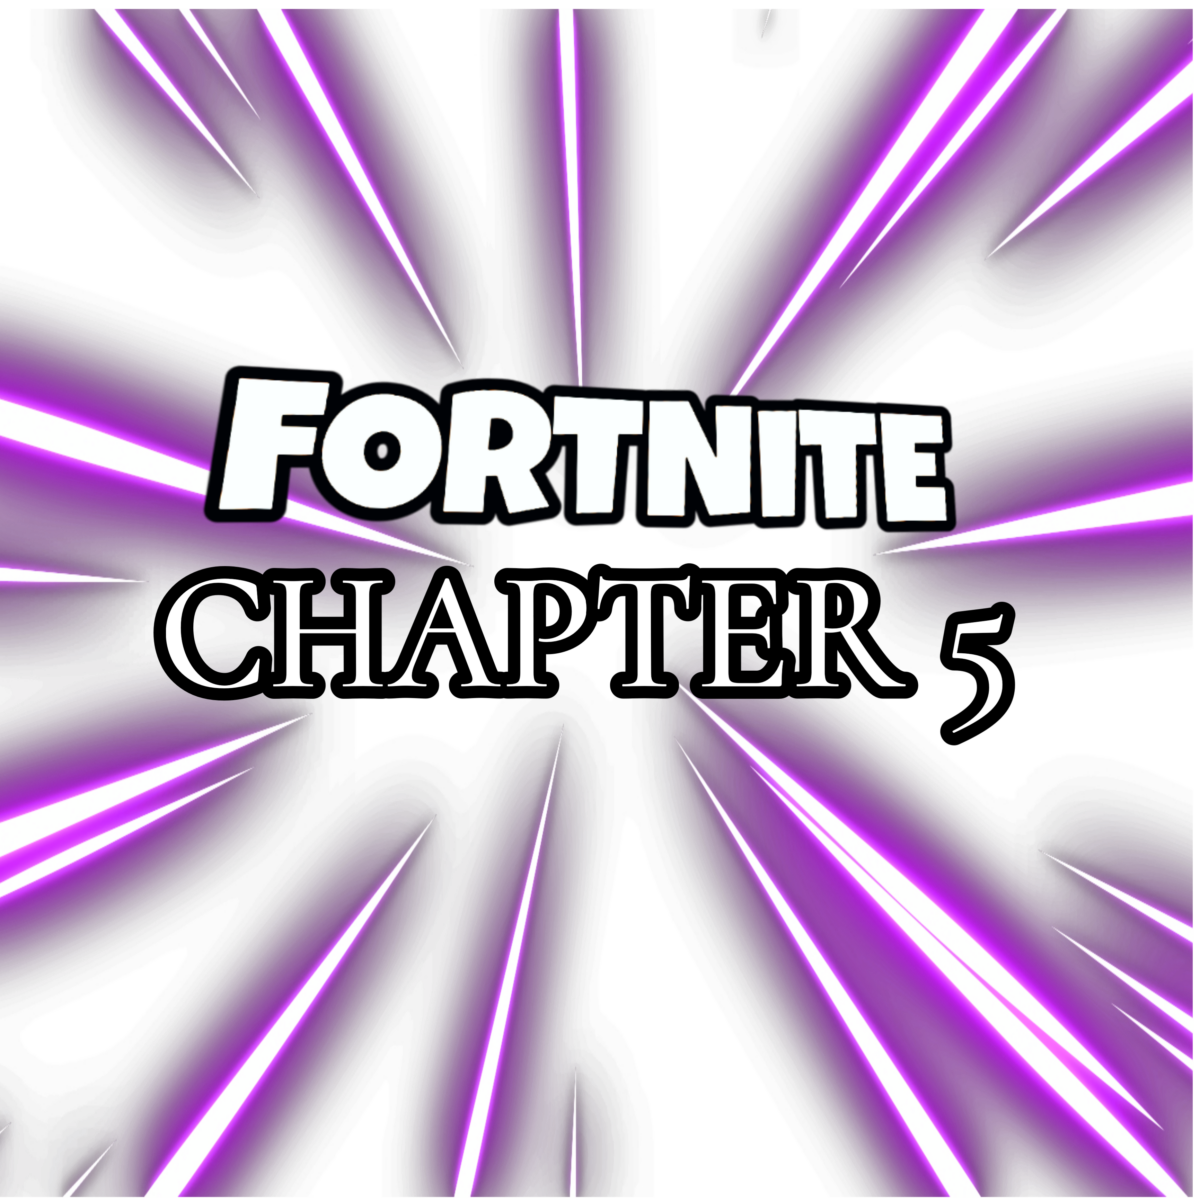 Fortnite Chapter 5 has released and players are at an all-time high.